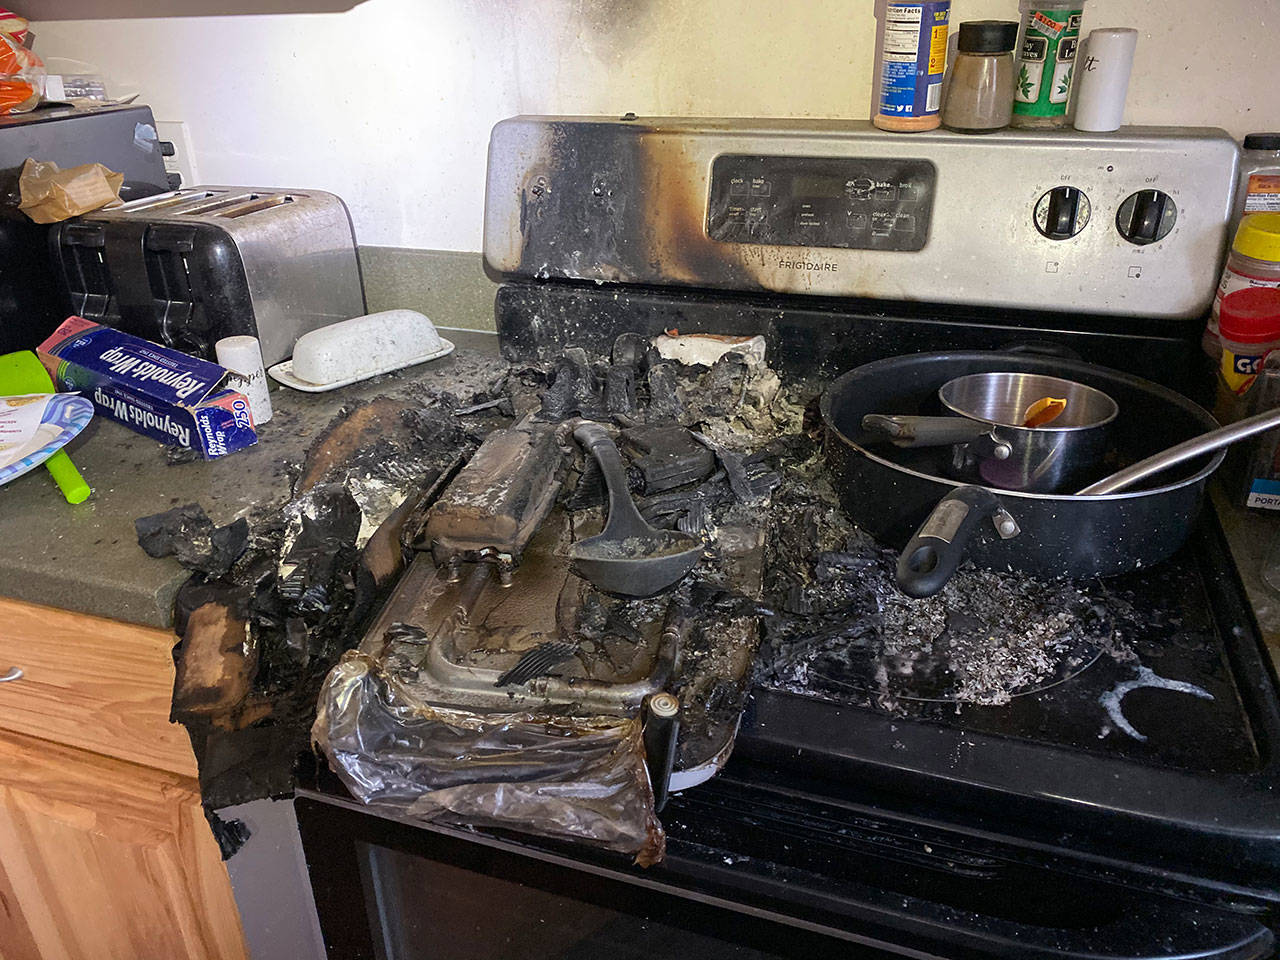 Fire damage due to the stove being left on accidentally. (photo courtesy of NKF&R)